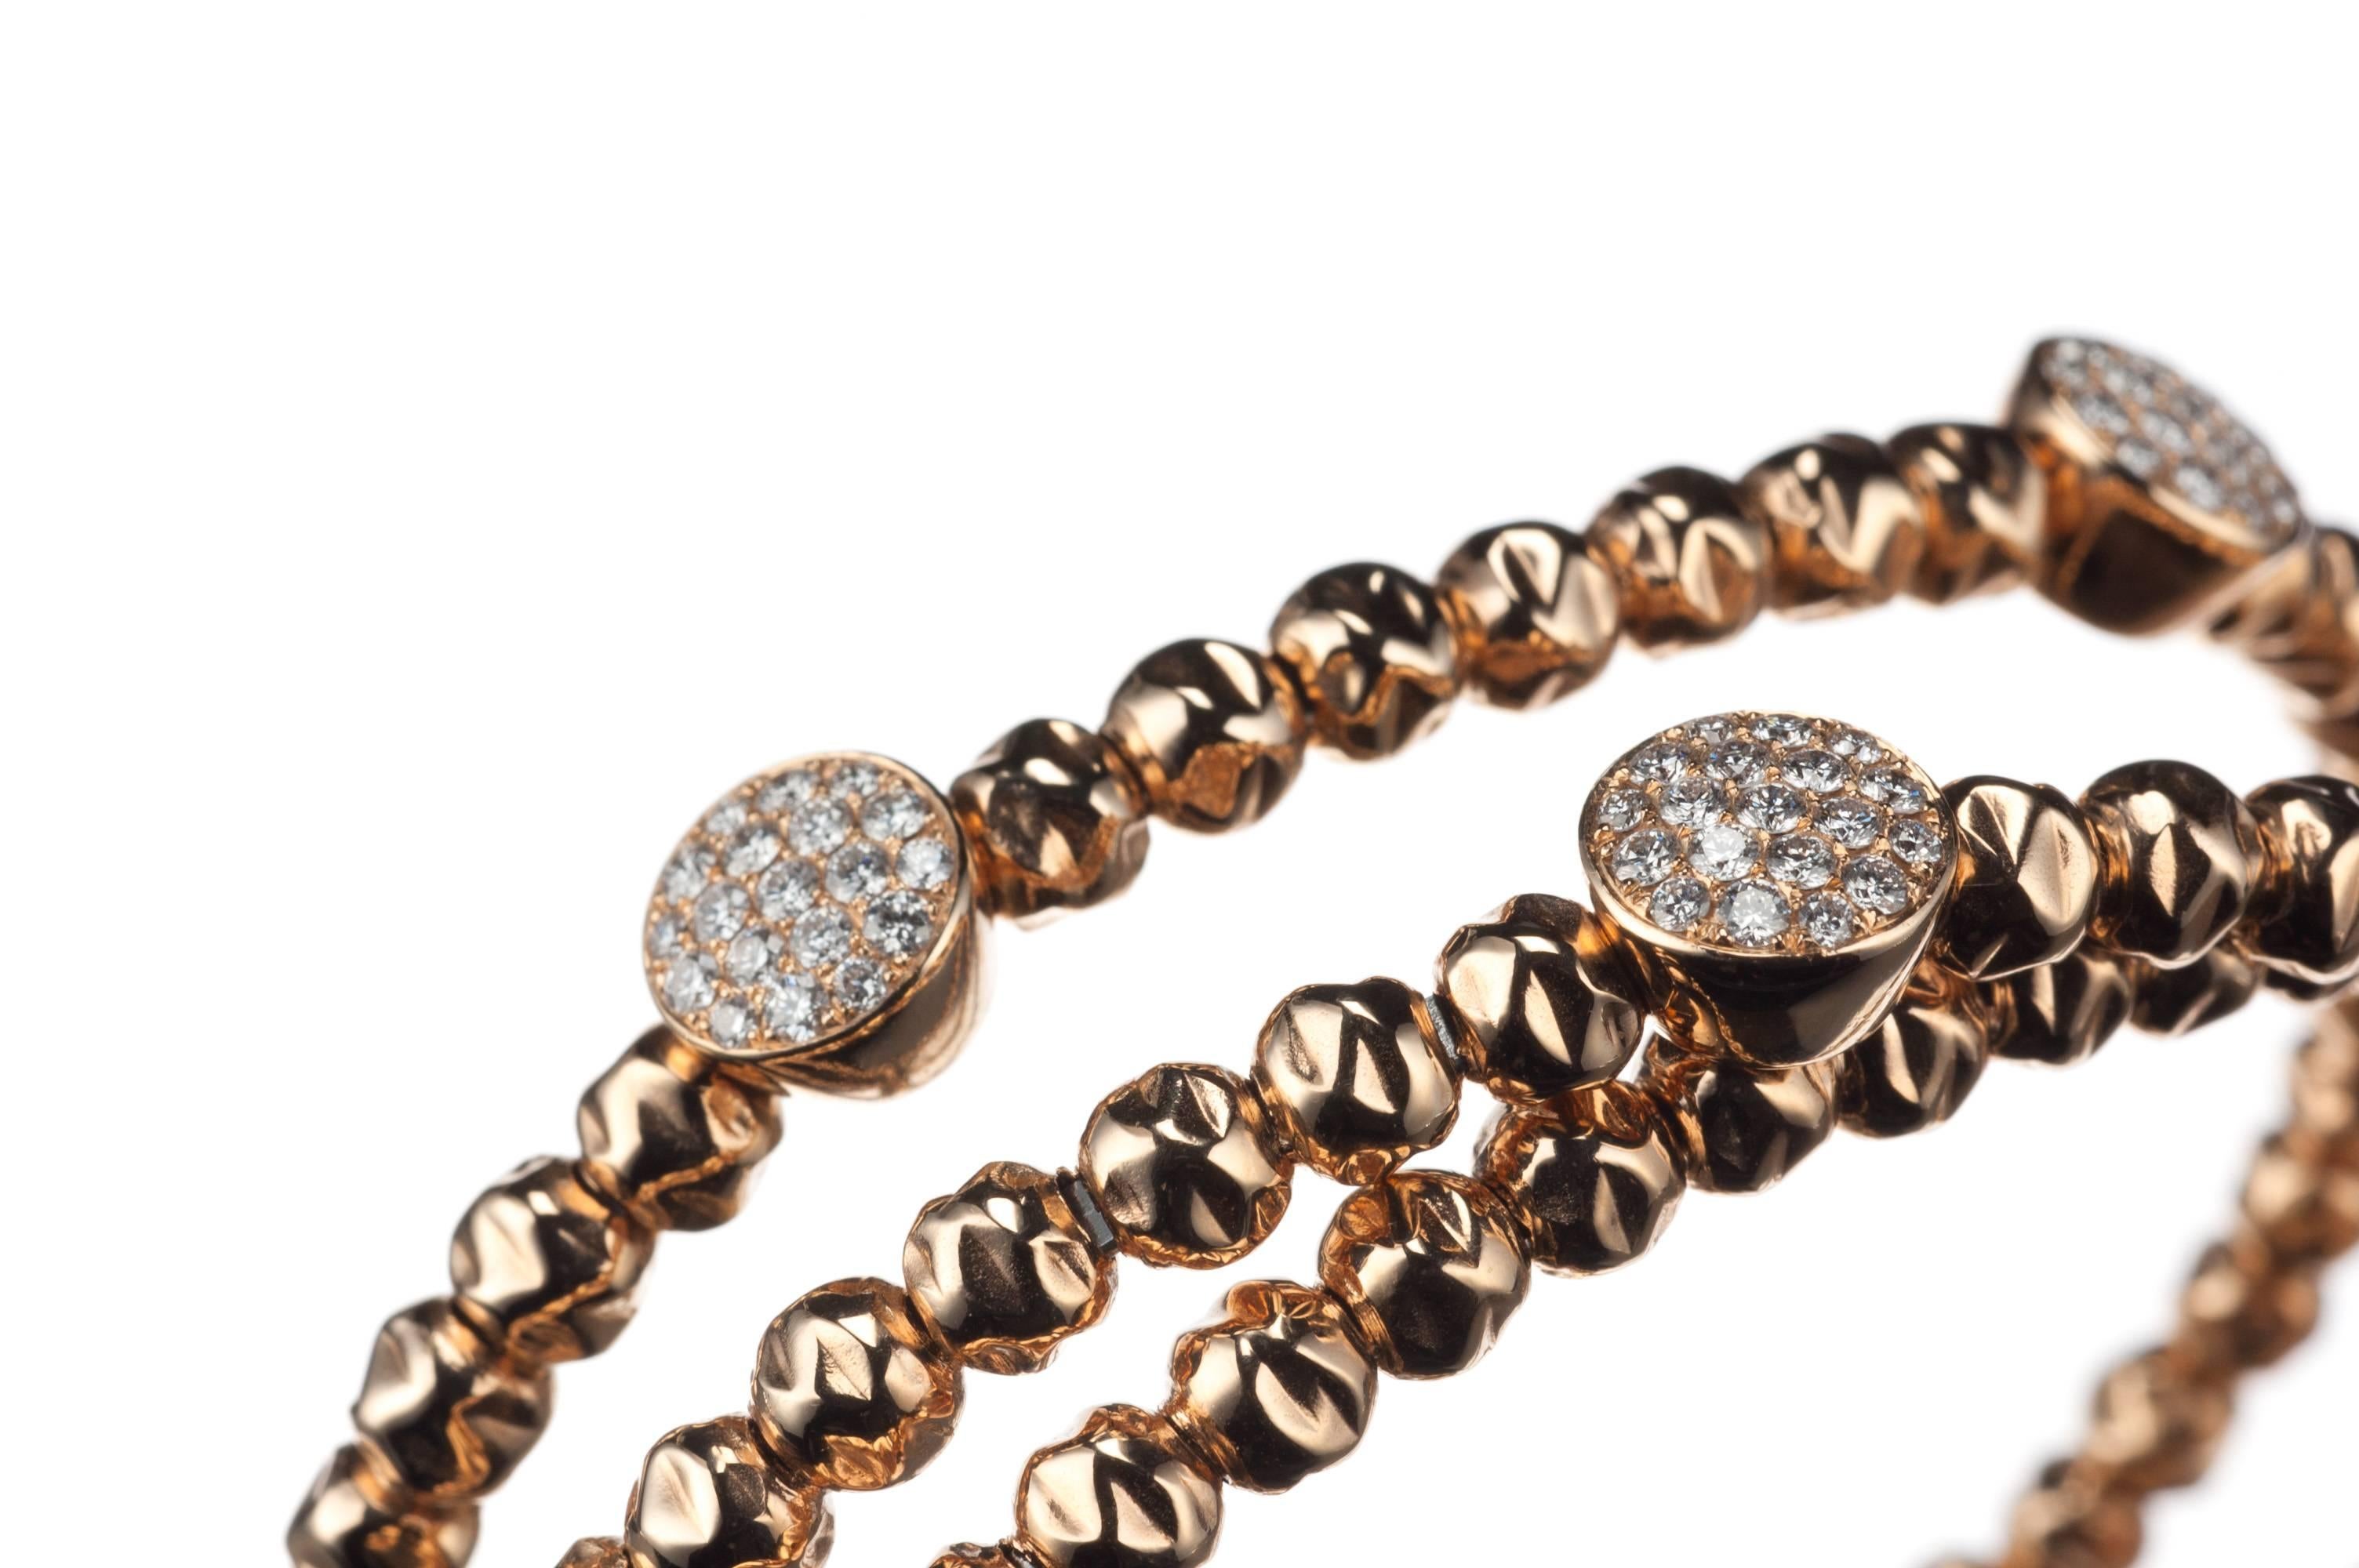 From the Damaso Martinez “Cosmic” collection, a bracelet fashioned in 18-karat rose gold and set with 57 brilliant-cut round diamonds, .74ctw. Made with a tensile substructure, the bracelet is flexible enough to slip on easily and rigid enough to